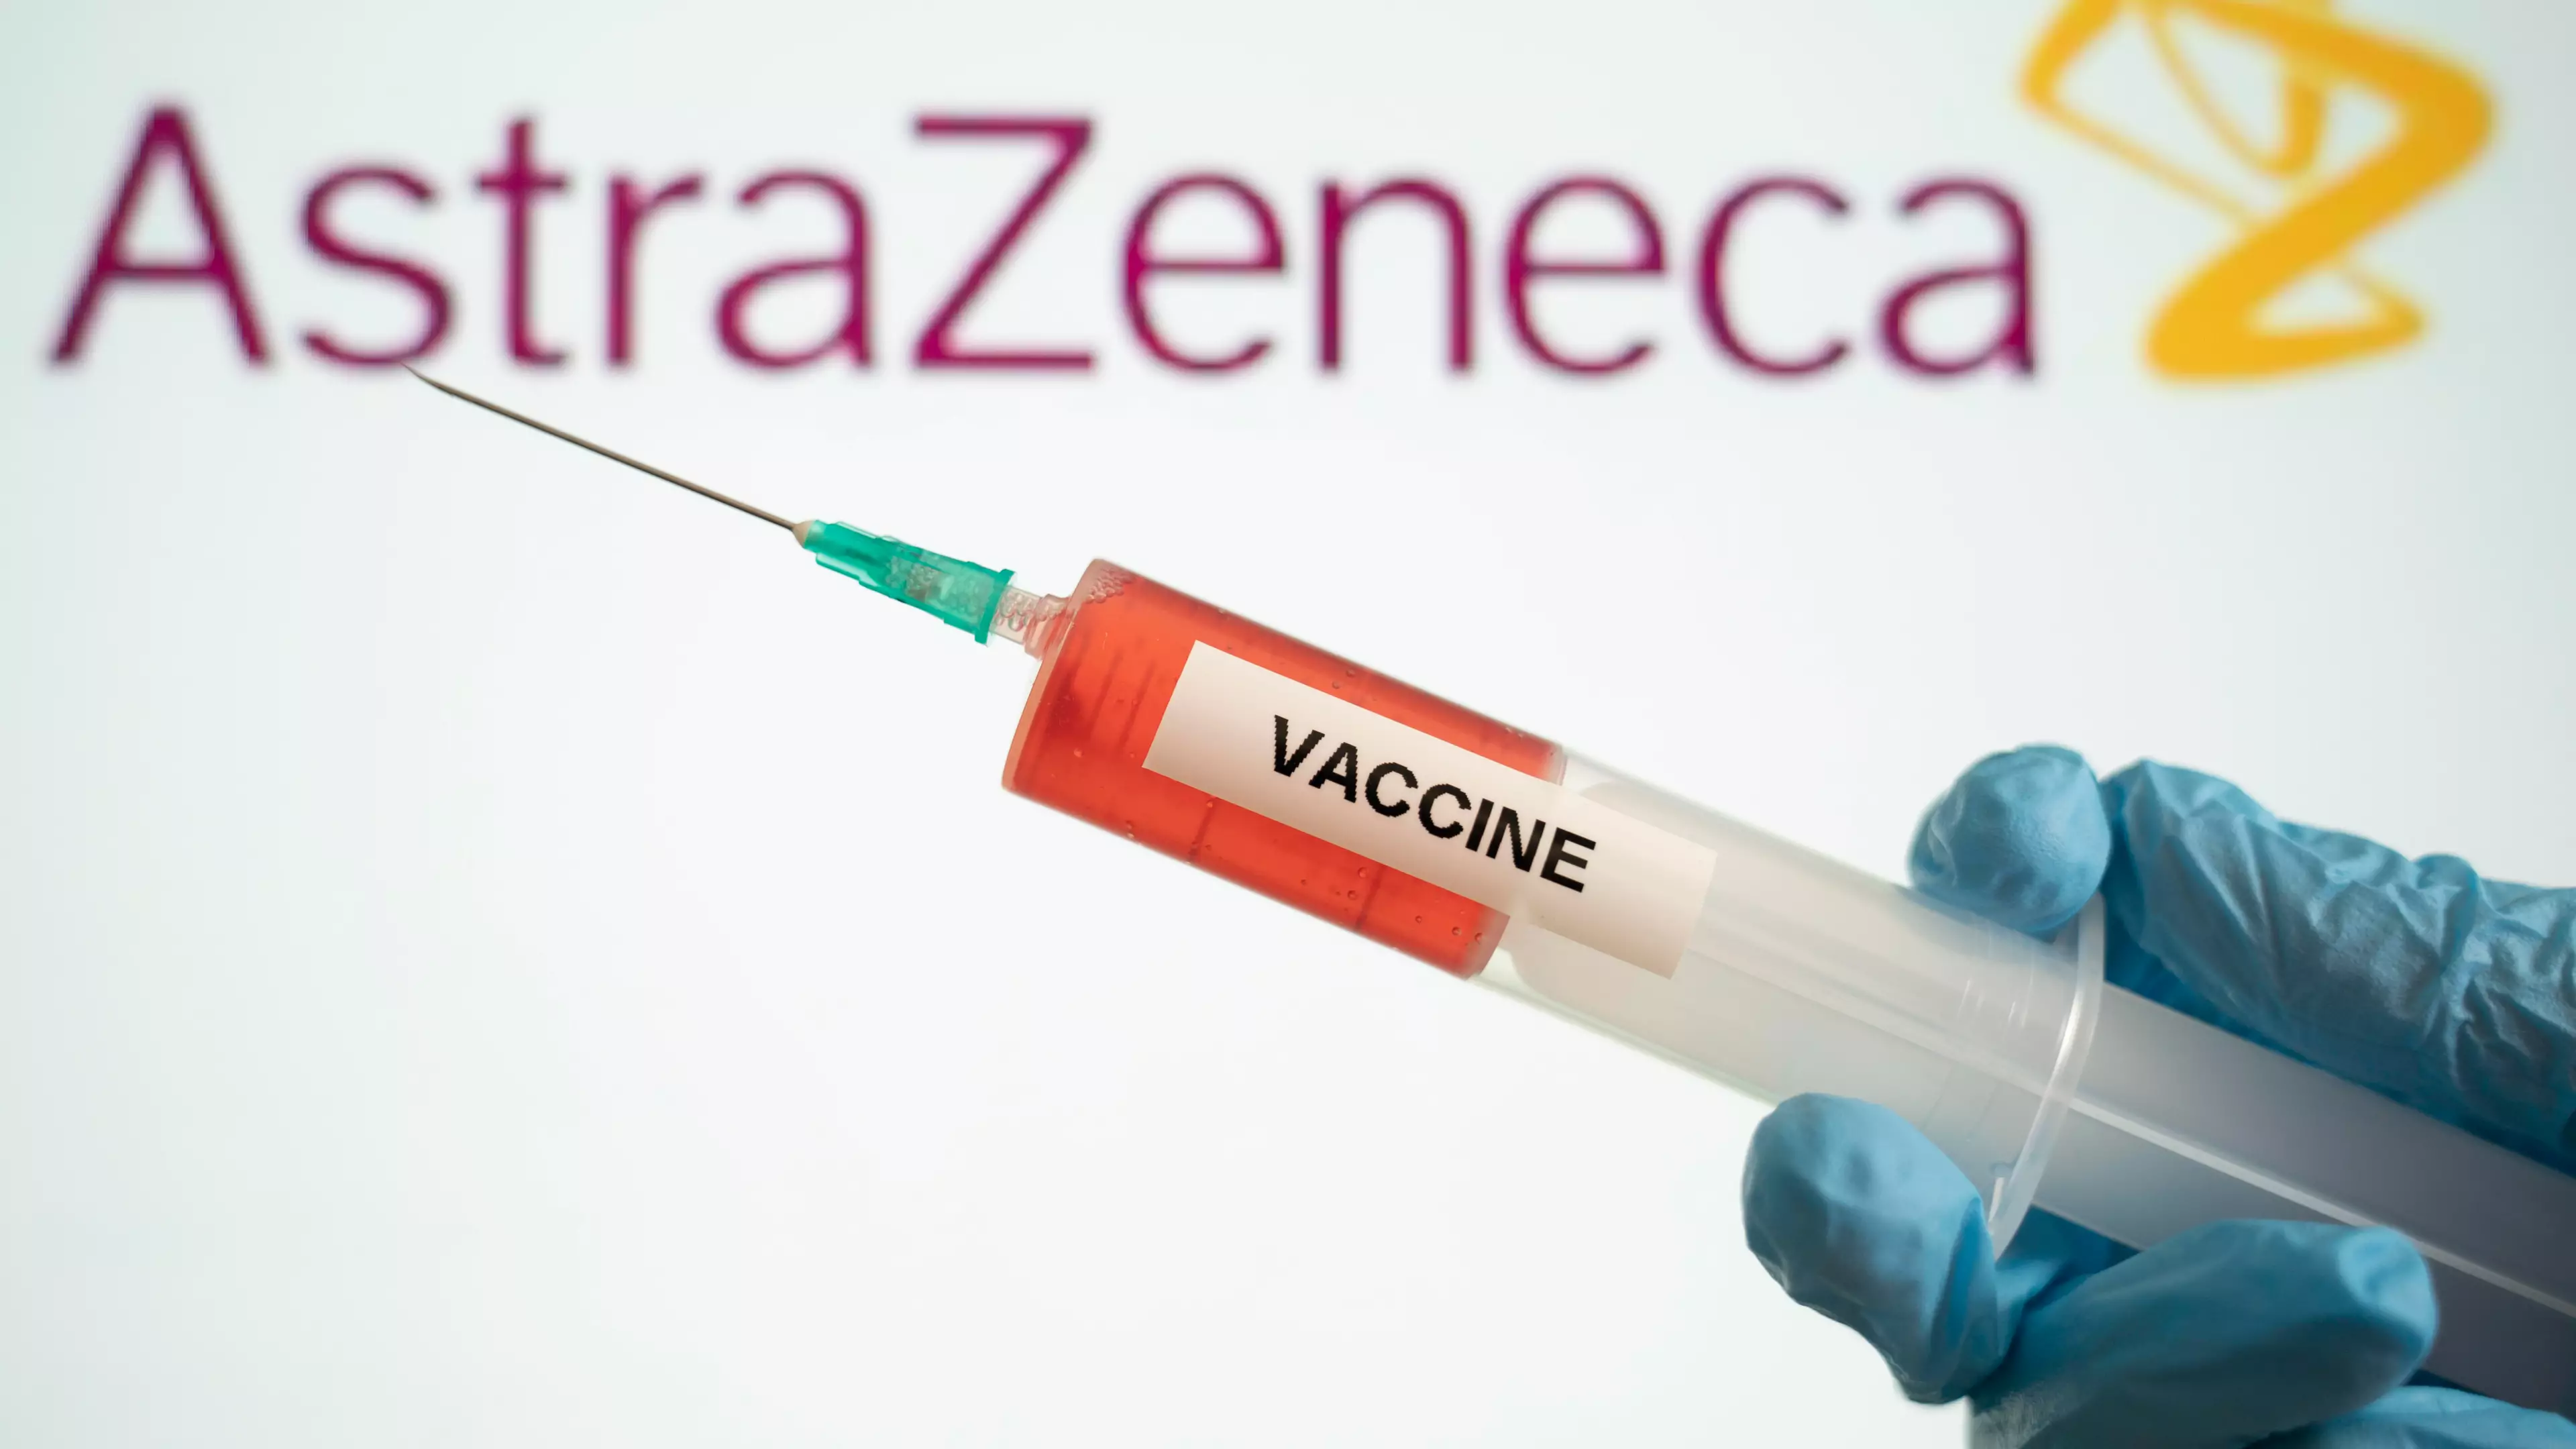 AstraZeneca Says There Is No Evidence To Suggest Covid-19 Vaccine Causes Blood Clots